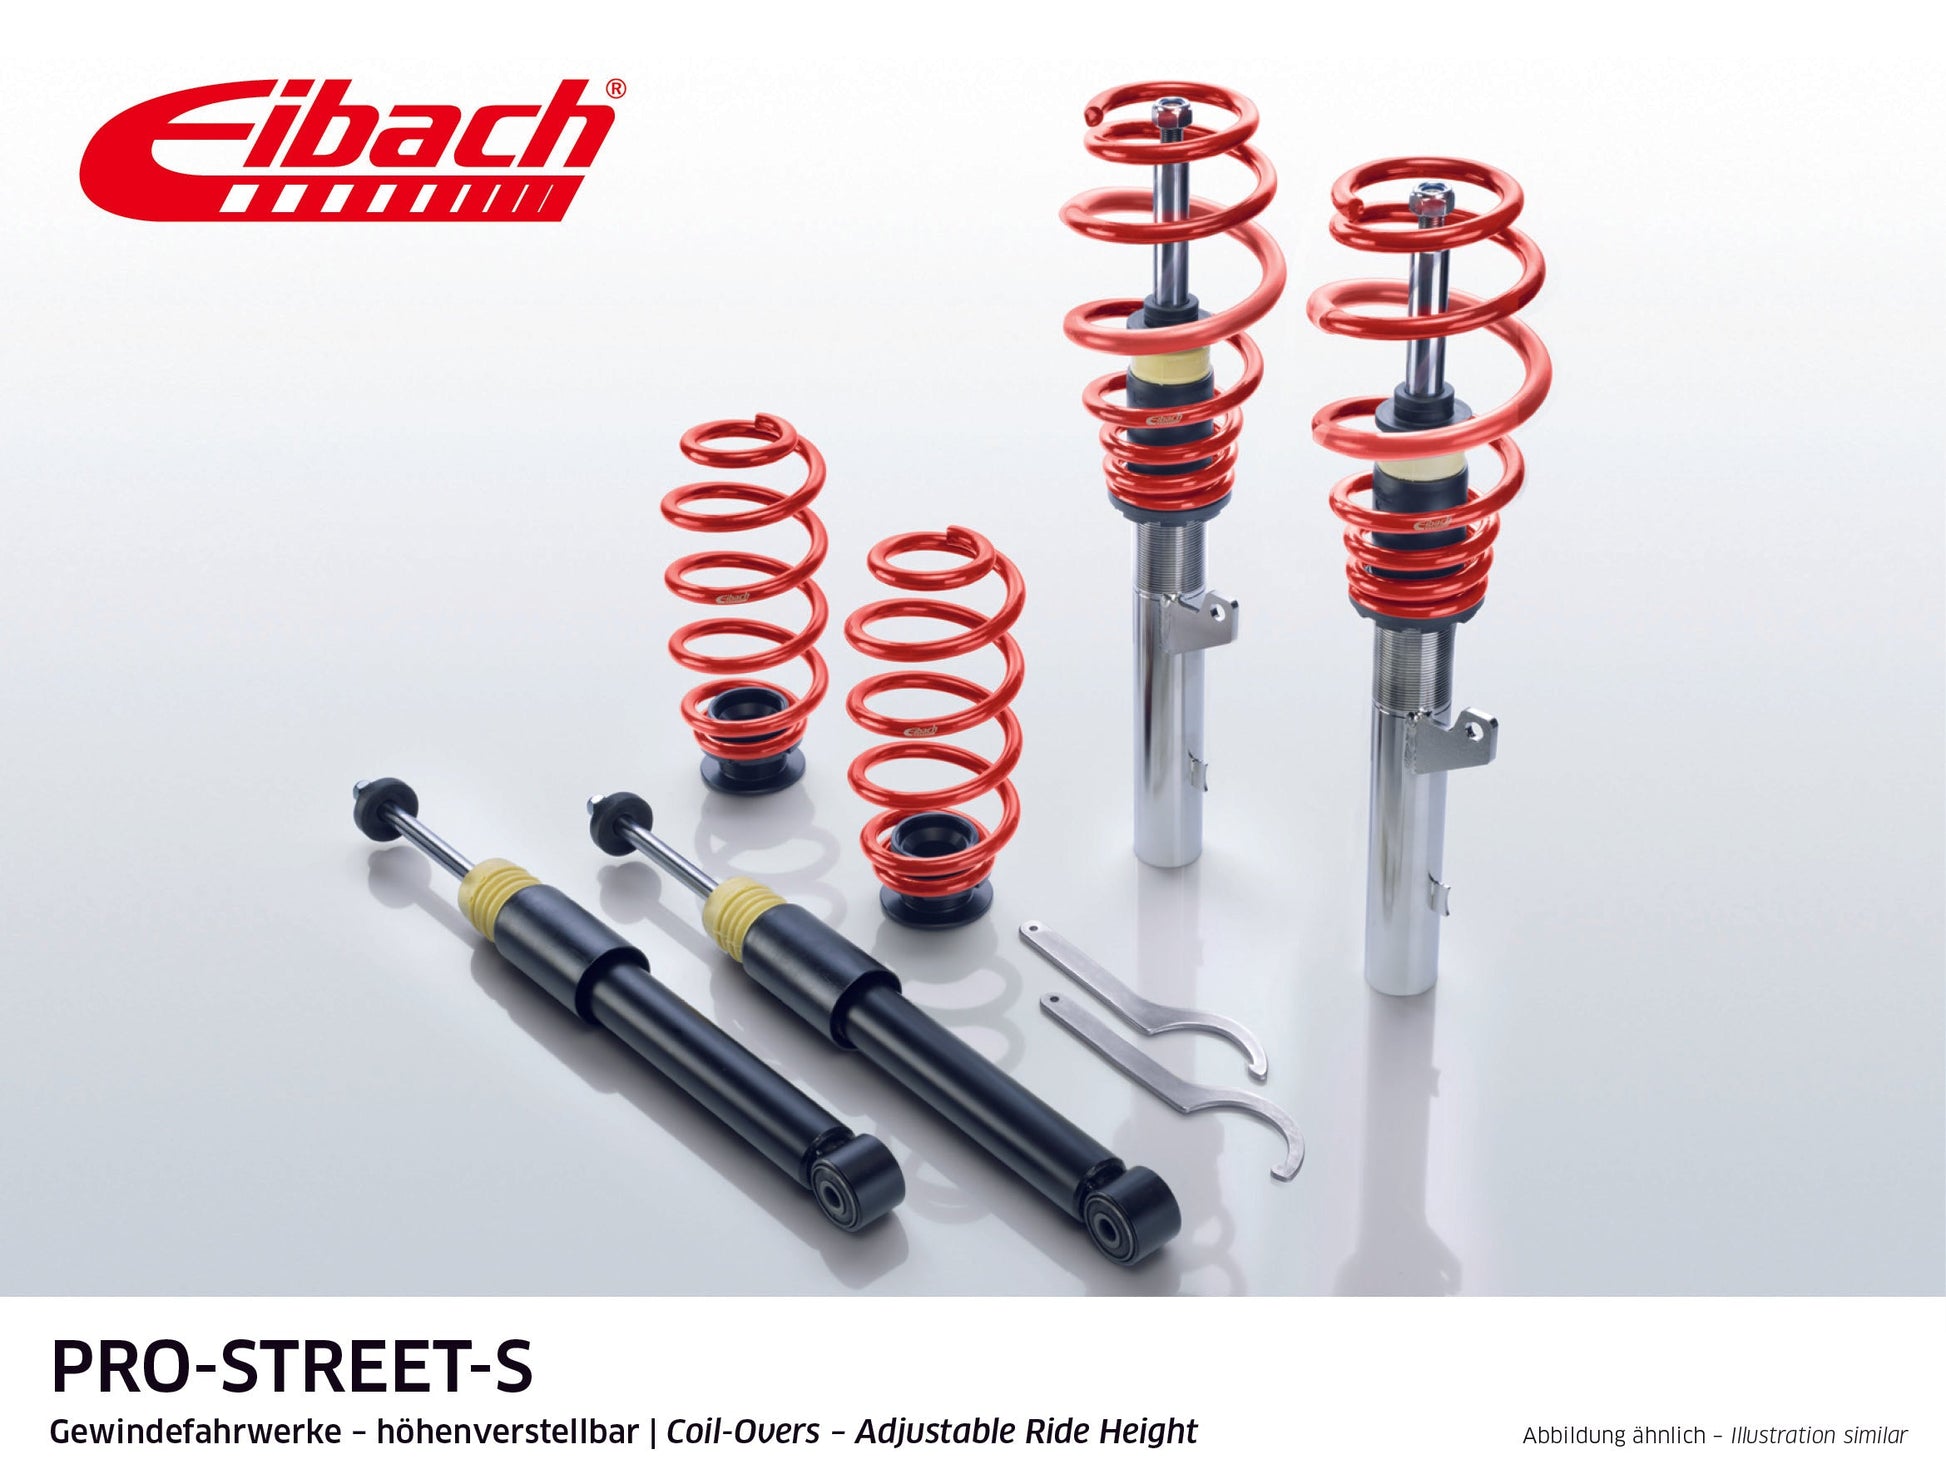 Eibach Pro-Street Coilover (PSS65-15-021-14-22) at £1129.38